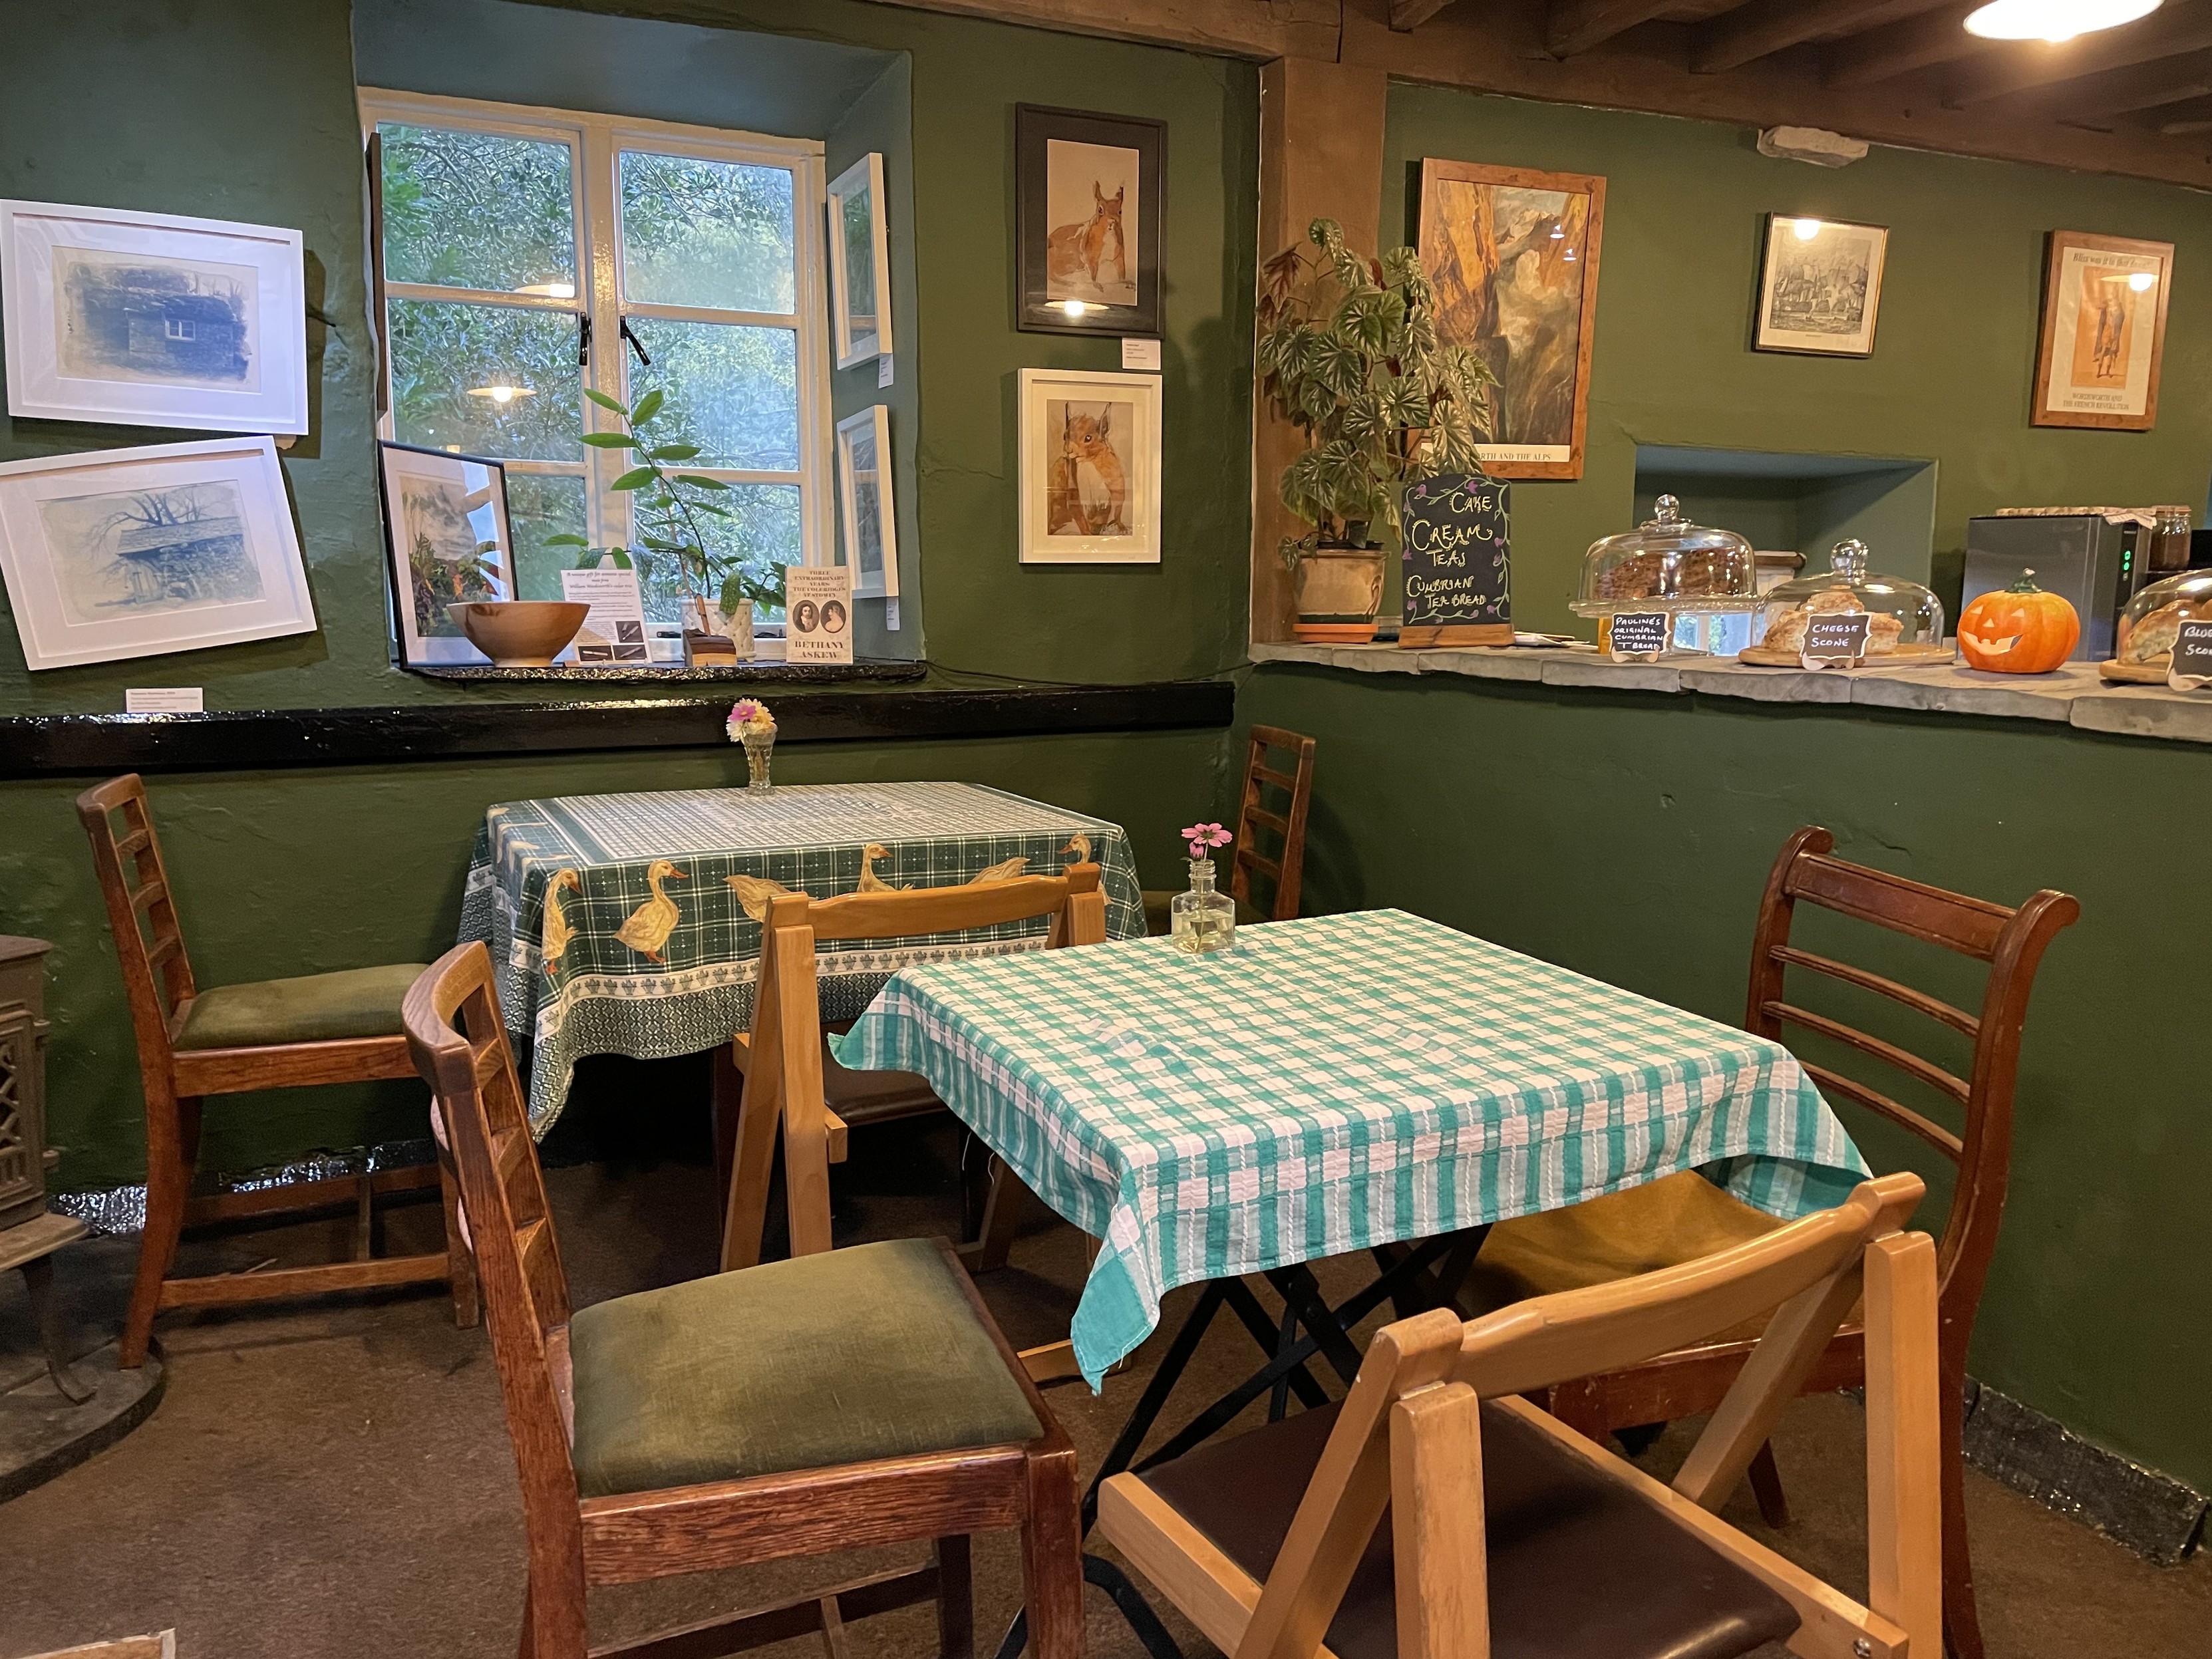 Two empty tables with three chairs each, covered by a green and white checkered table cloth, in a cafe with green walls with many paintings on them, next to a counter with various cakes on it under glass covers and a little pumpkin. 